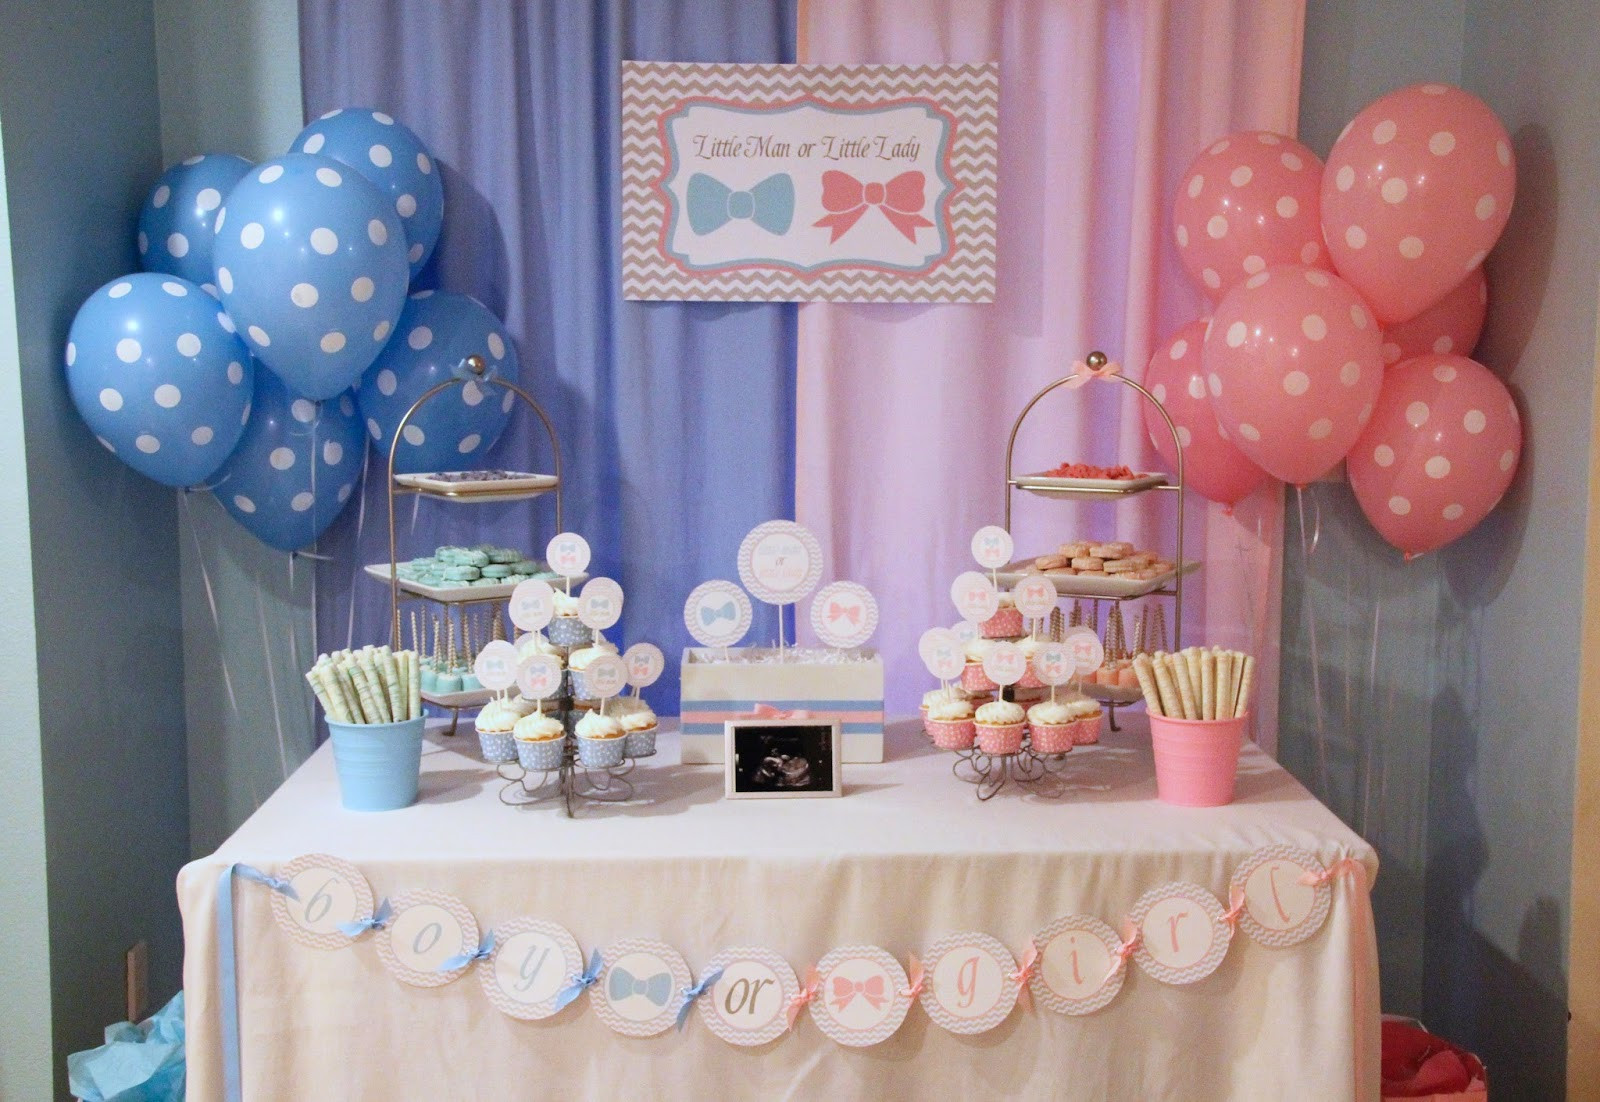 Gender Reveal Party Ideas
 5M Creations Gender Reveal Party Little Man or Little Lady